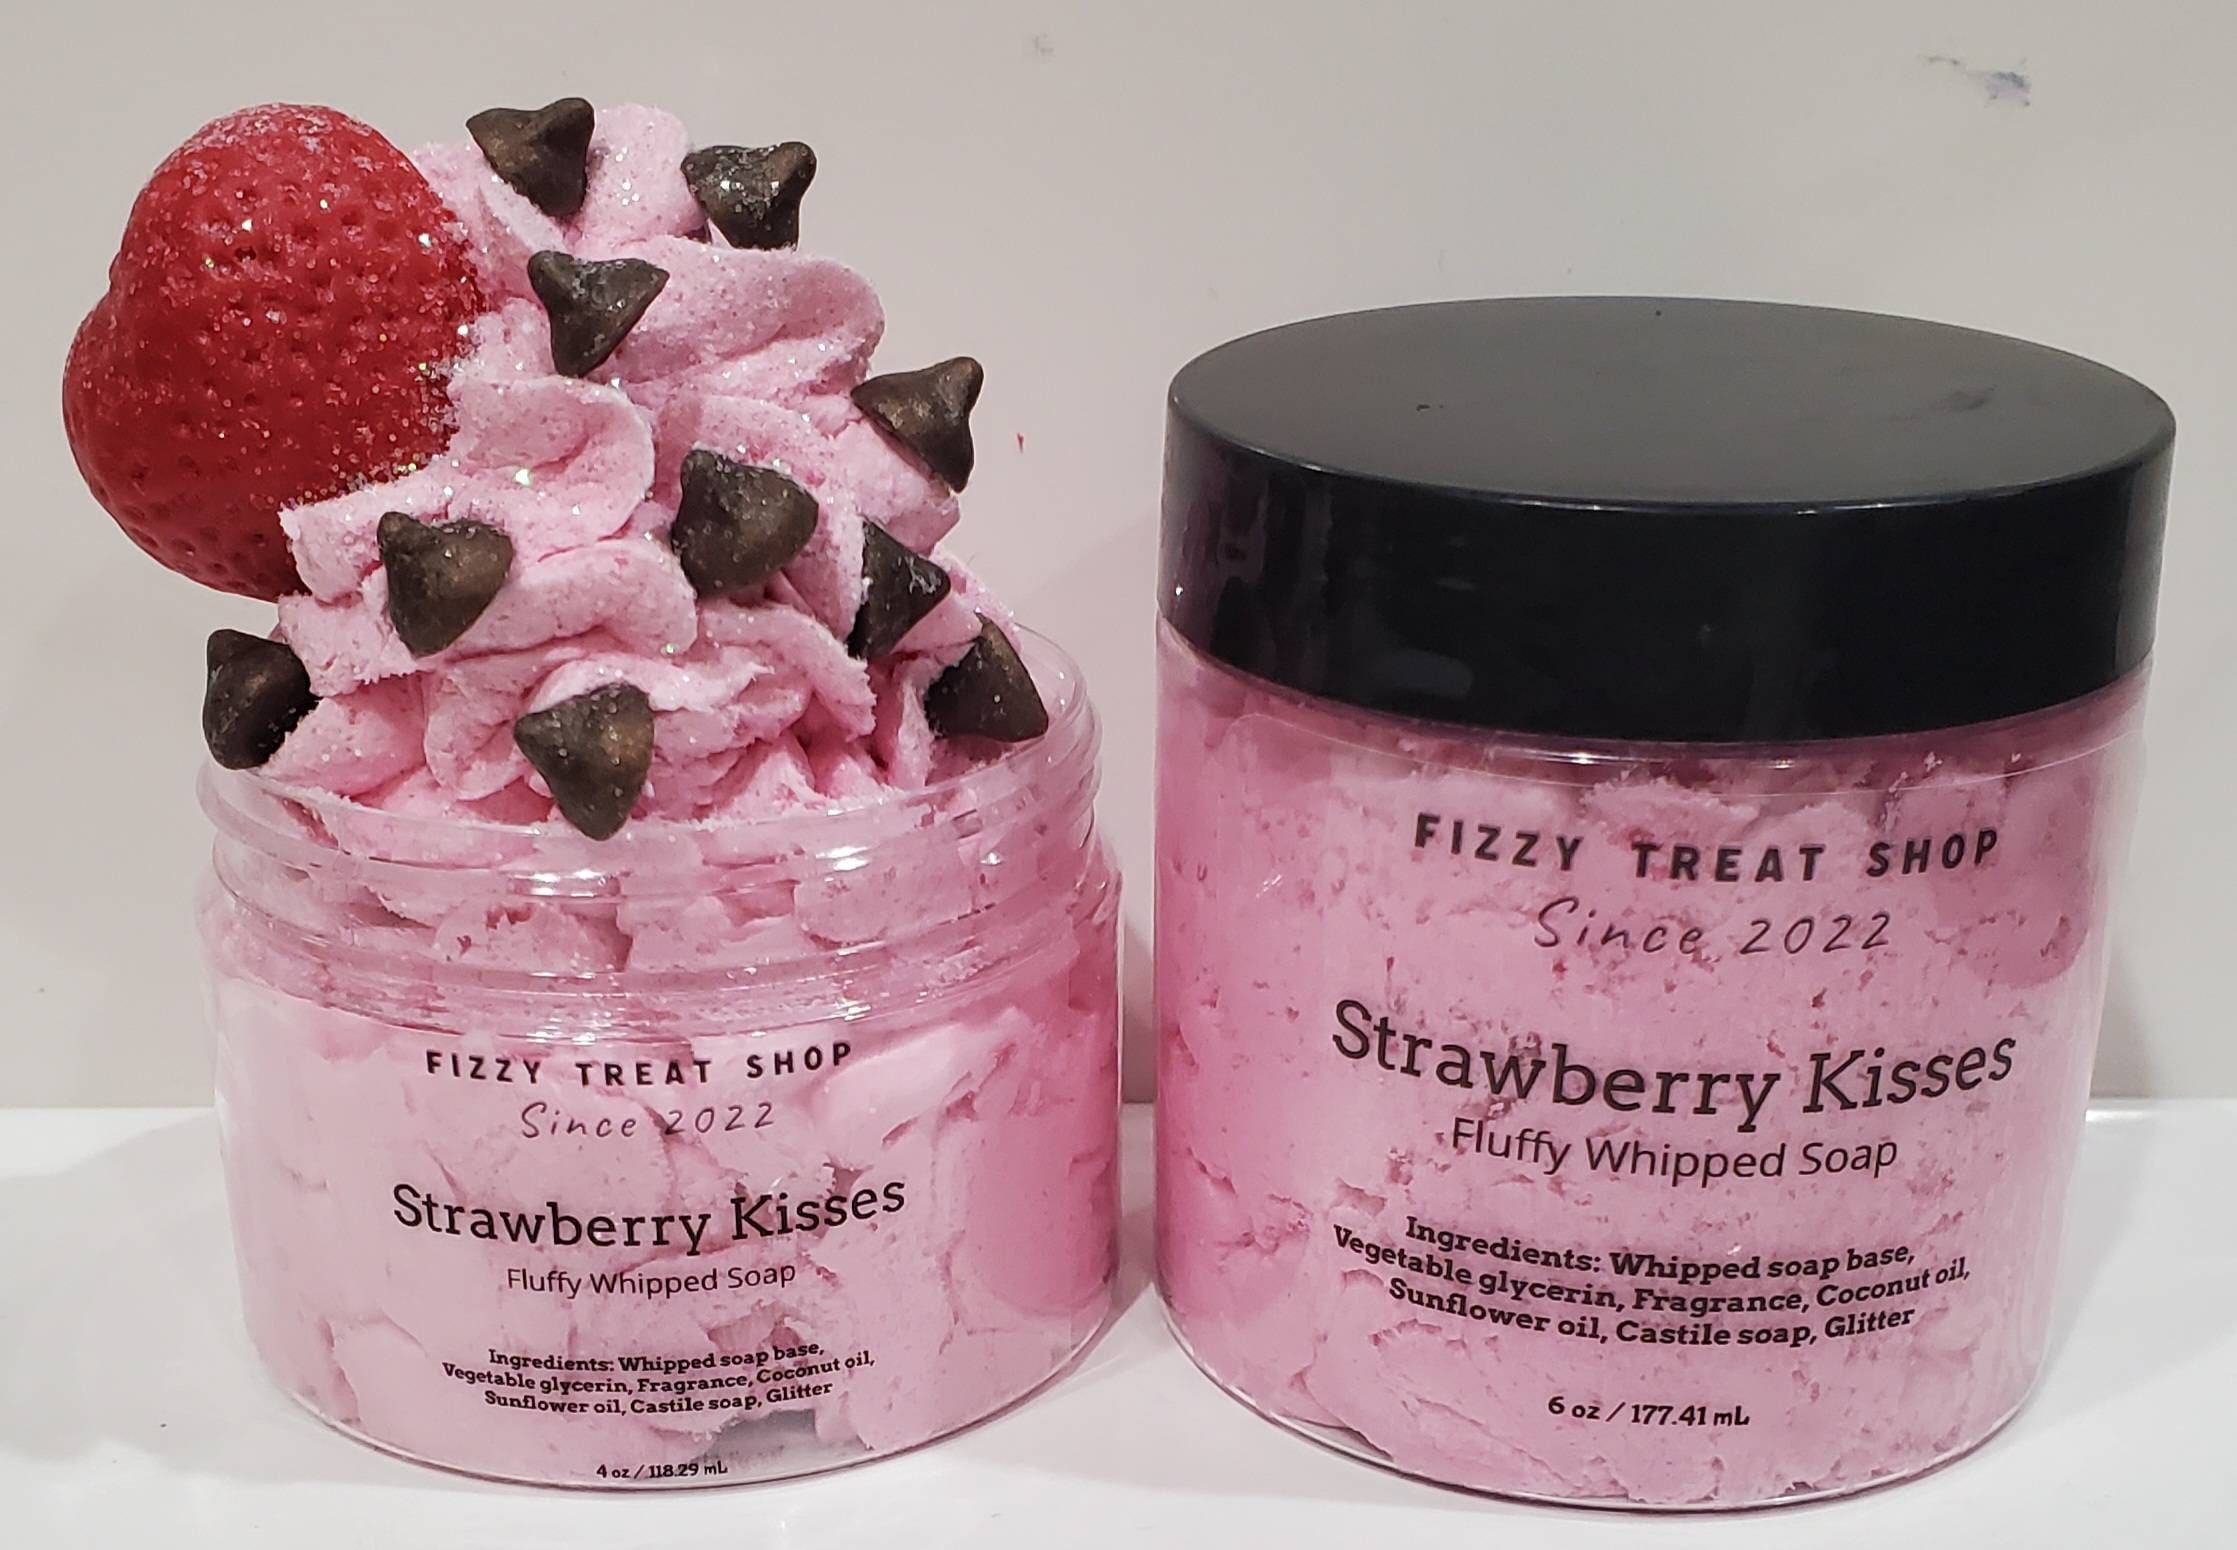 Strawberry Kisses/ Fluffy Whipped Soap/ Strawberry & Chocolate